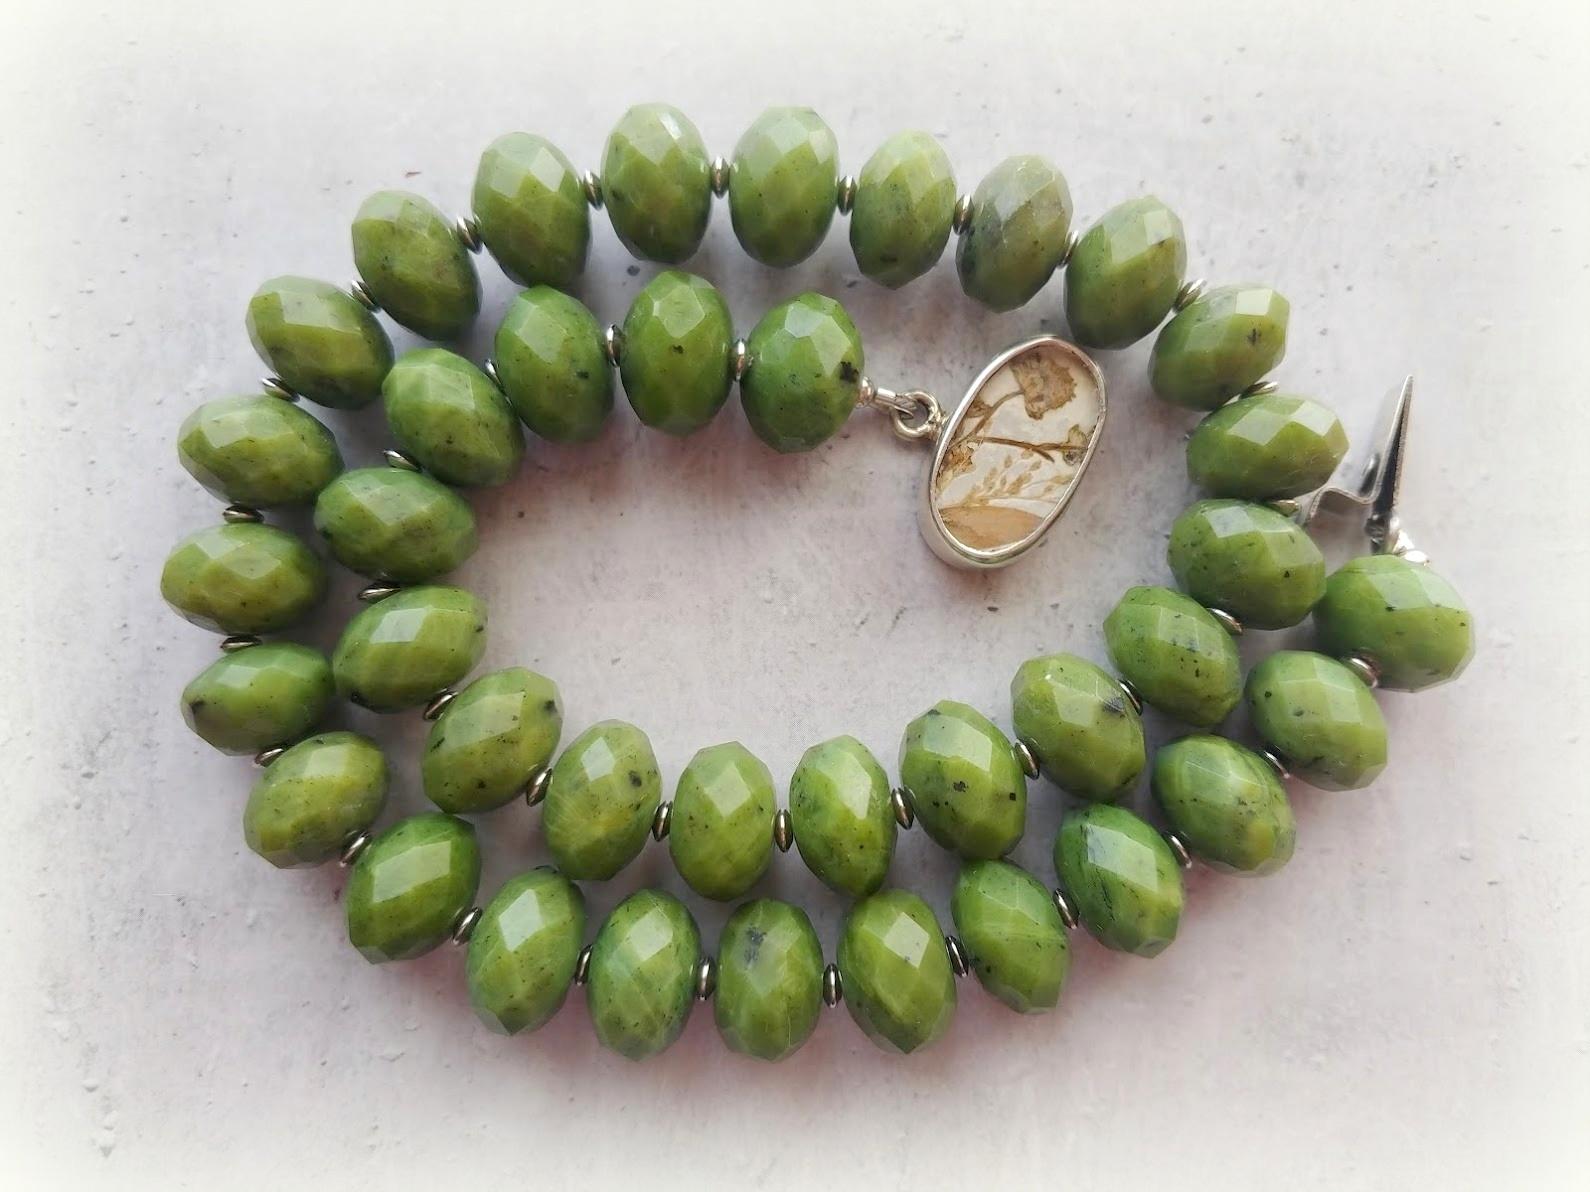 Canadian nephrite beaded necklace from Northern British Columbia.

The length of the necklace is 19 inches (48 cm). The size of the faceted rondelle beads is 15 mm. The nephrite beads are of excellent quality.
Nephrite beads are nontranslucent.
The